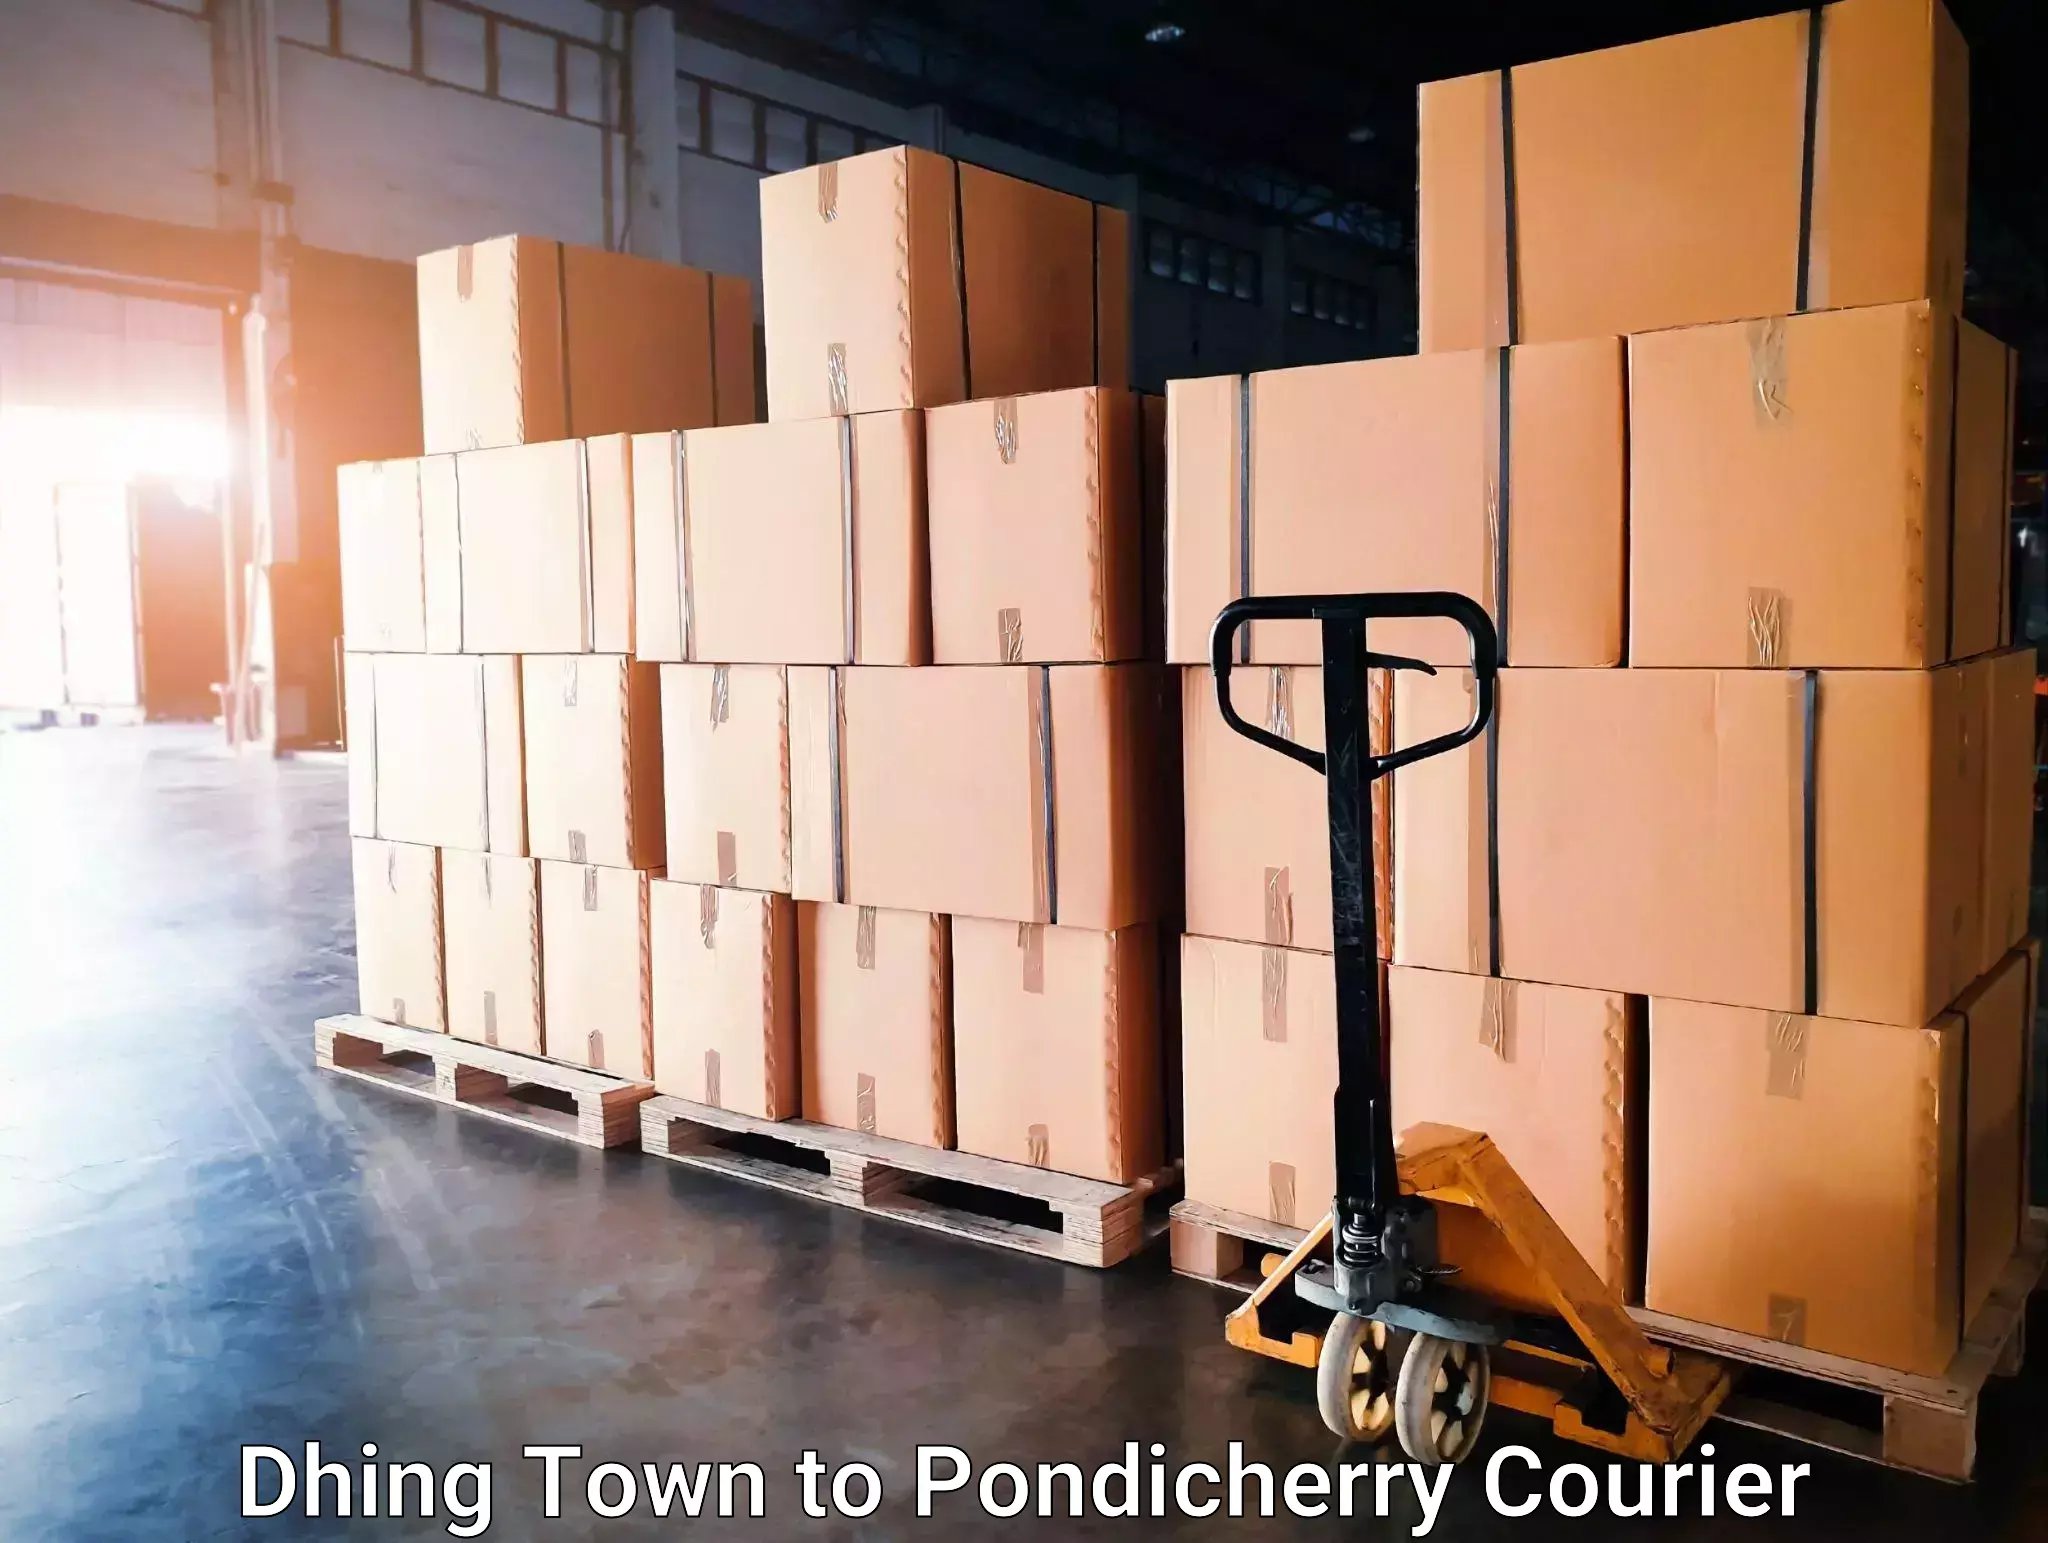 Courier service efficiency Dhing Town to Pondicherry